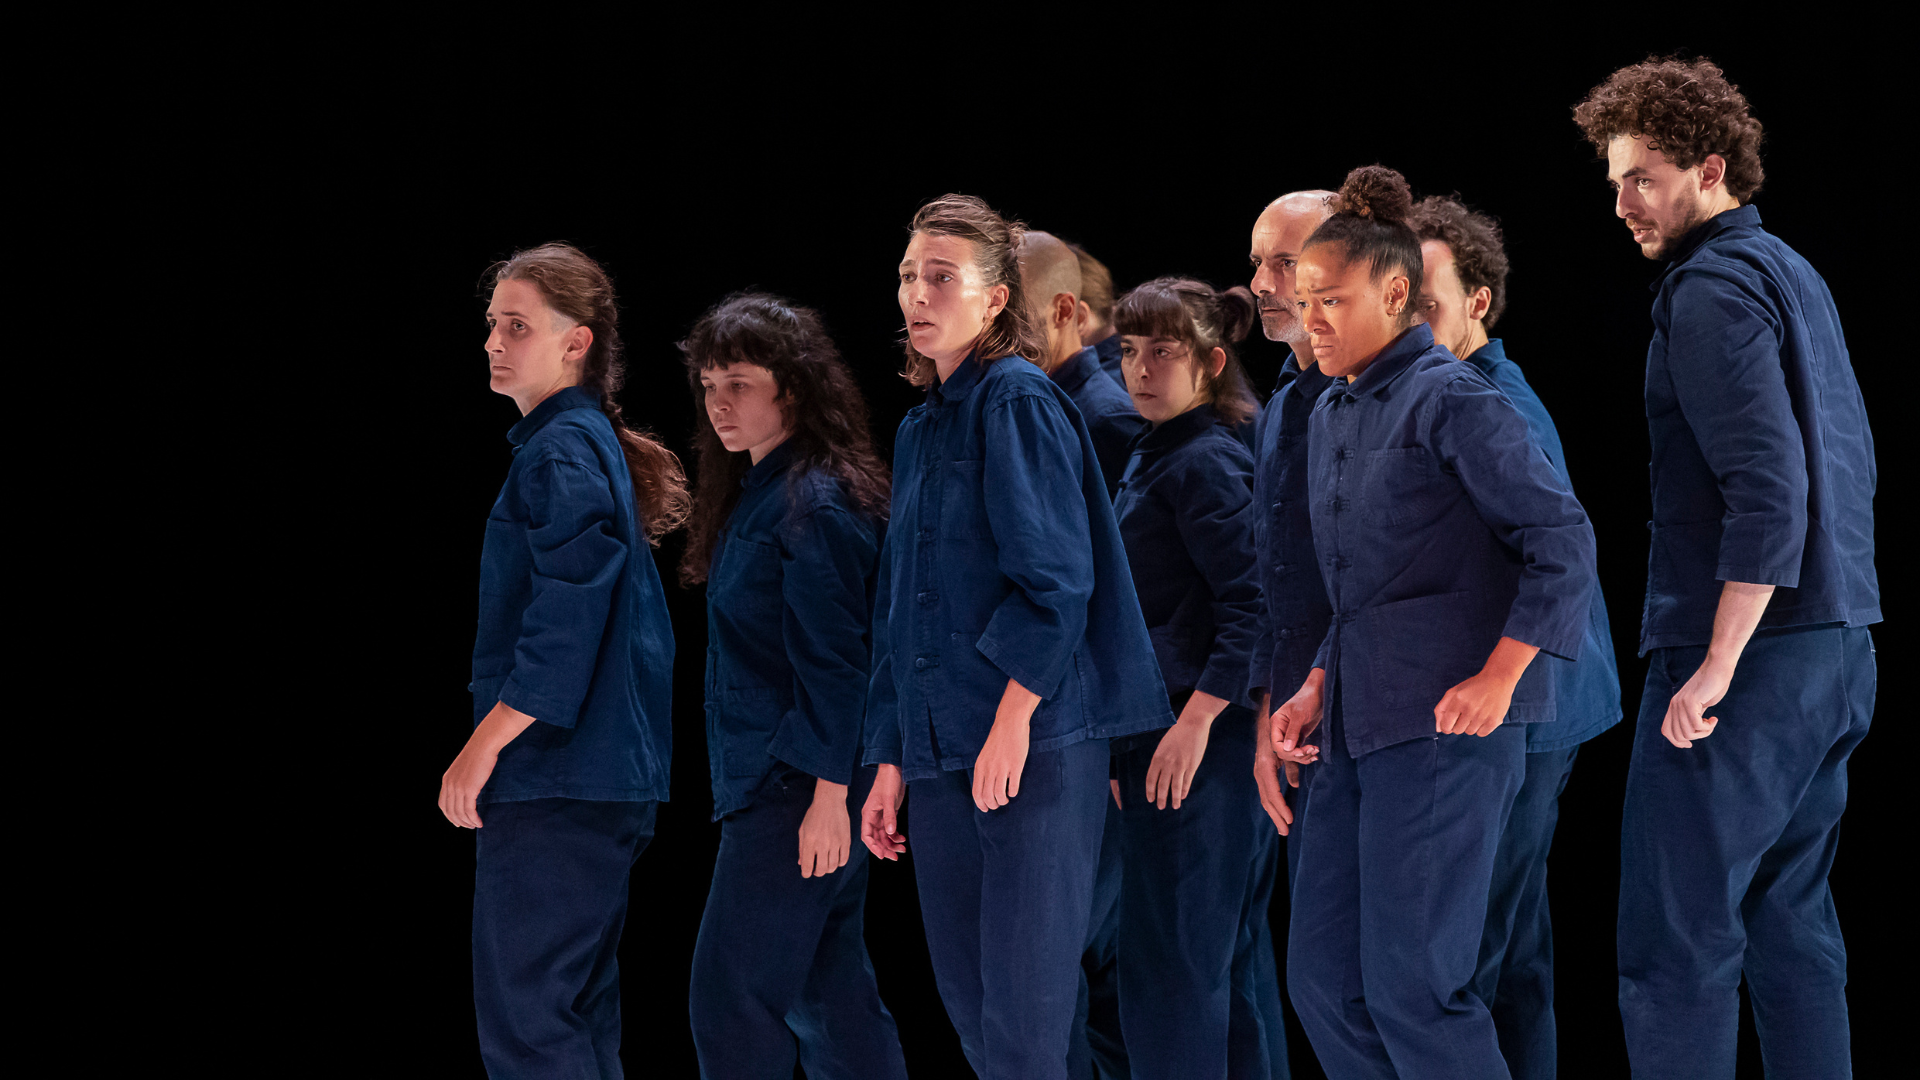 Group of performers in blue jump suits stand together all facing the same direction on a dimly lit stage